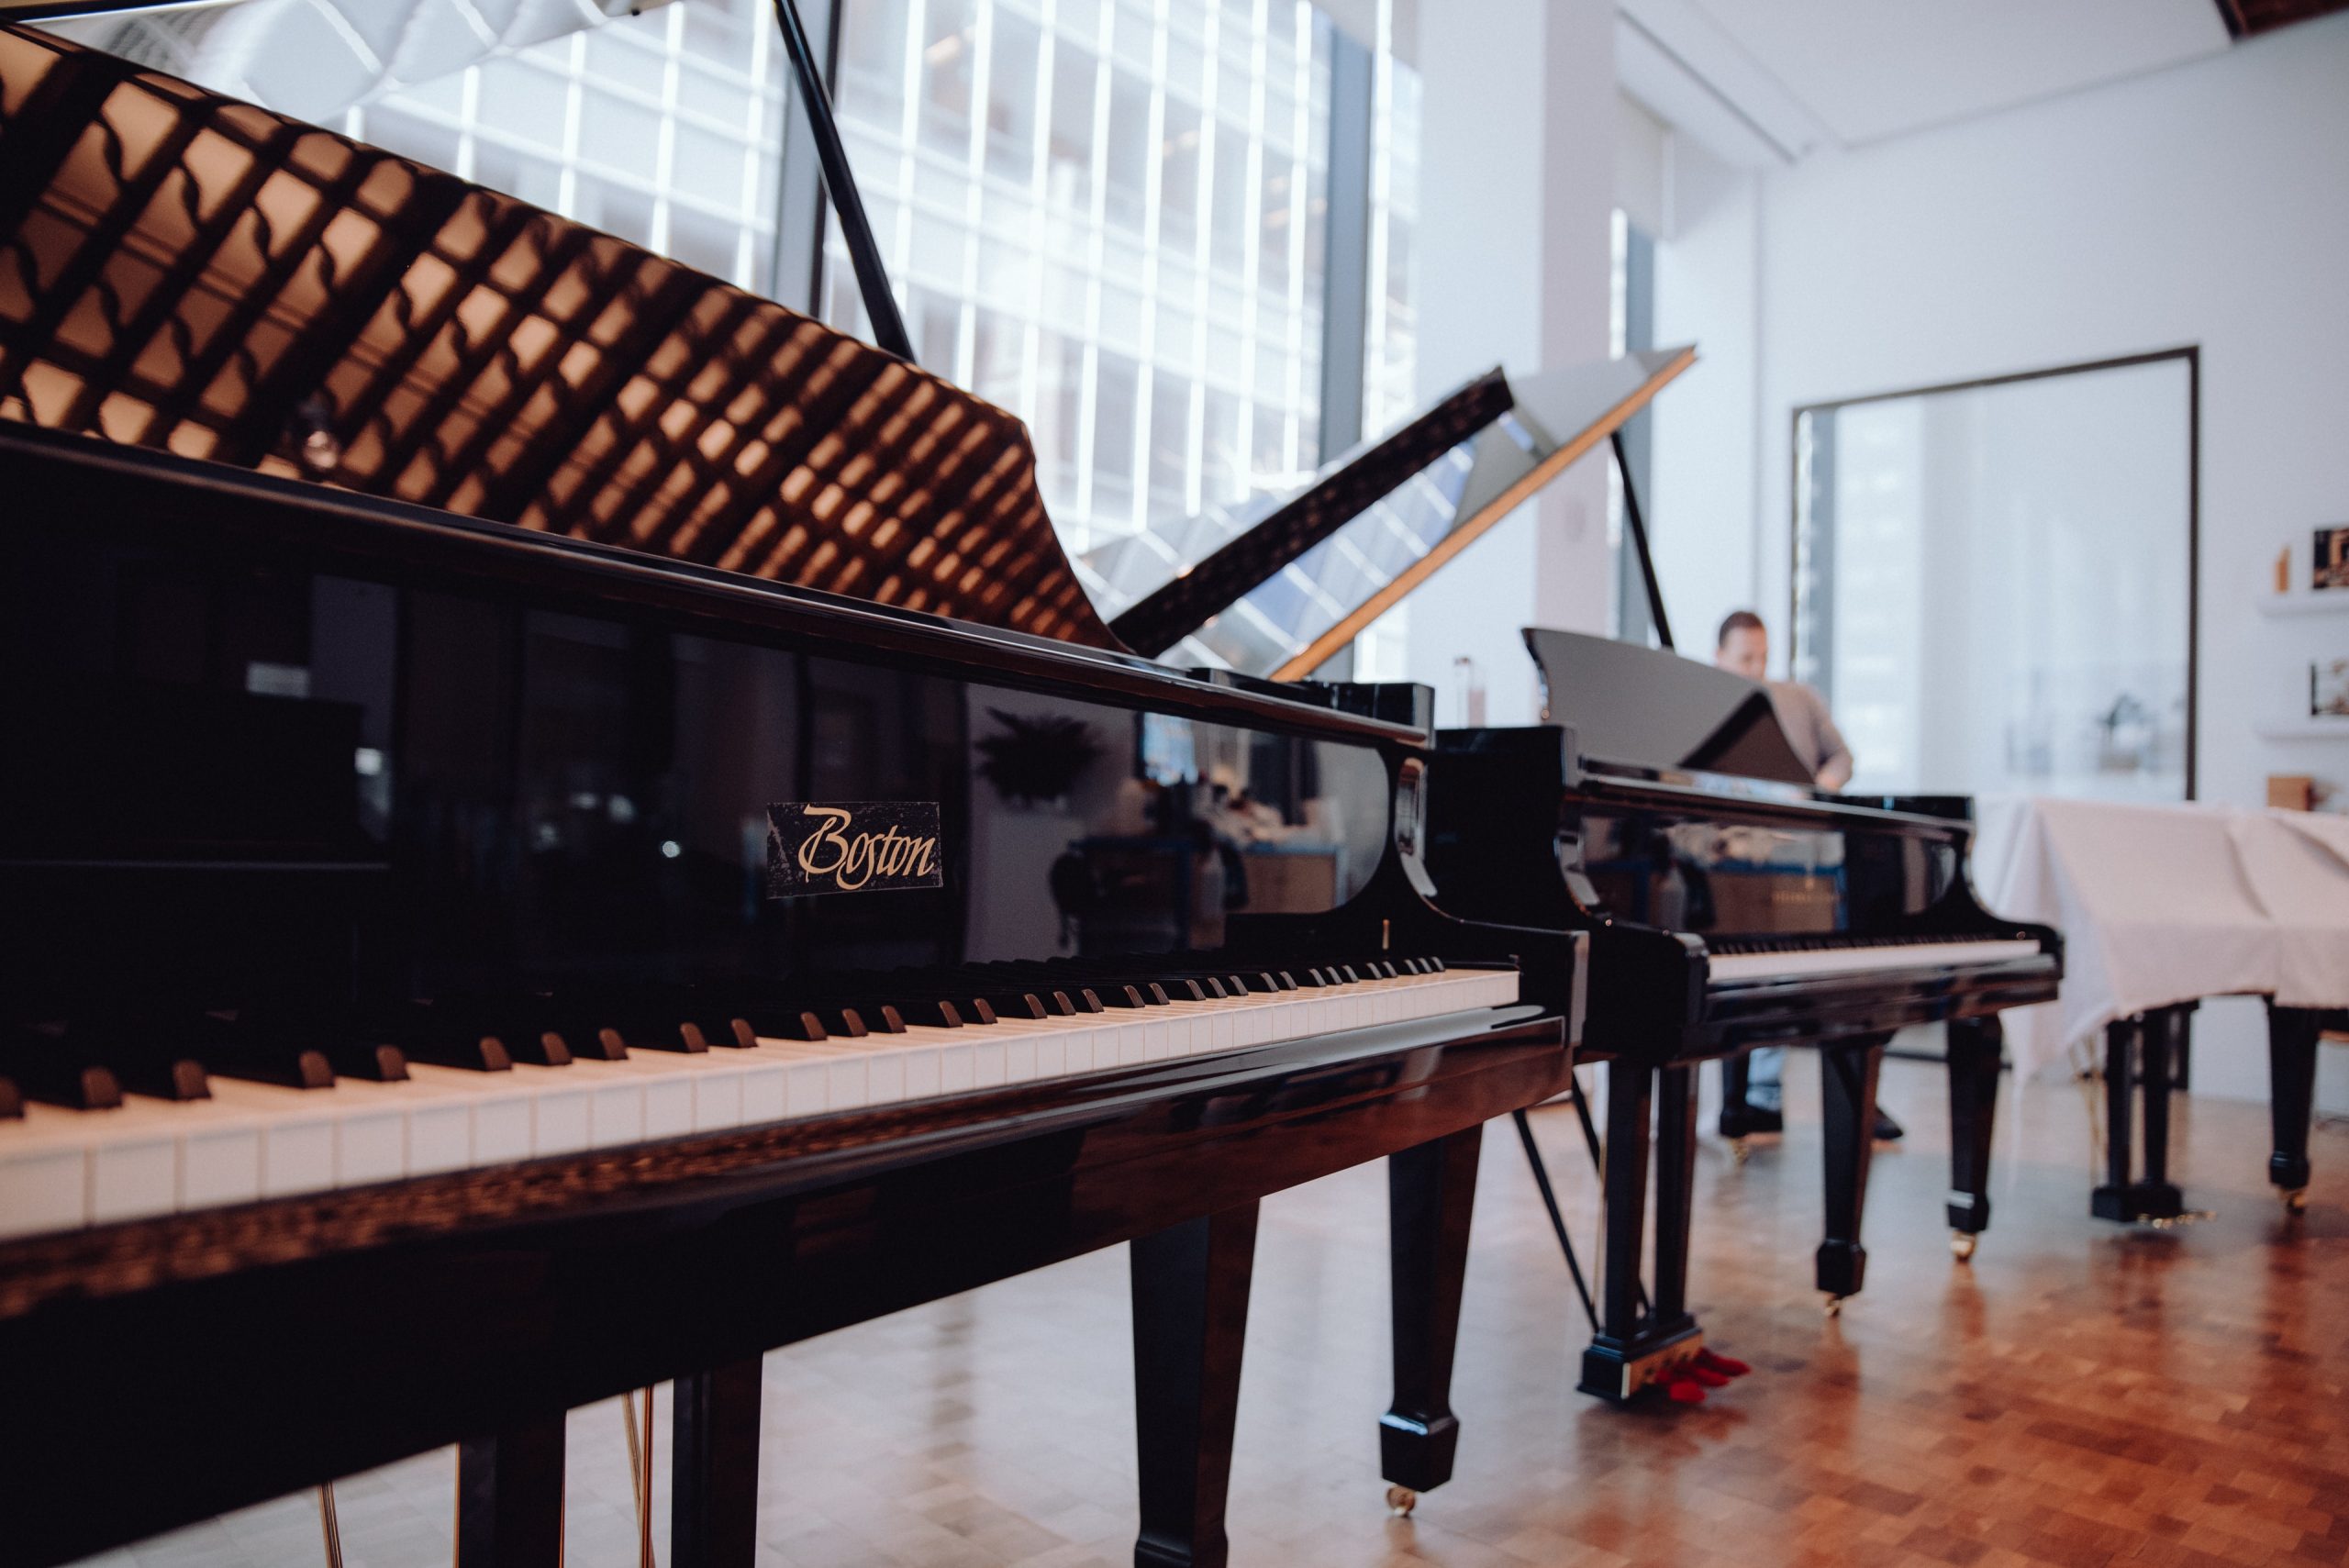 Essex vs Boston: a shopping guide for piano lovers